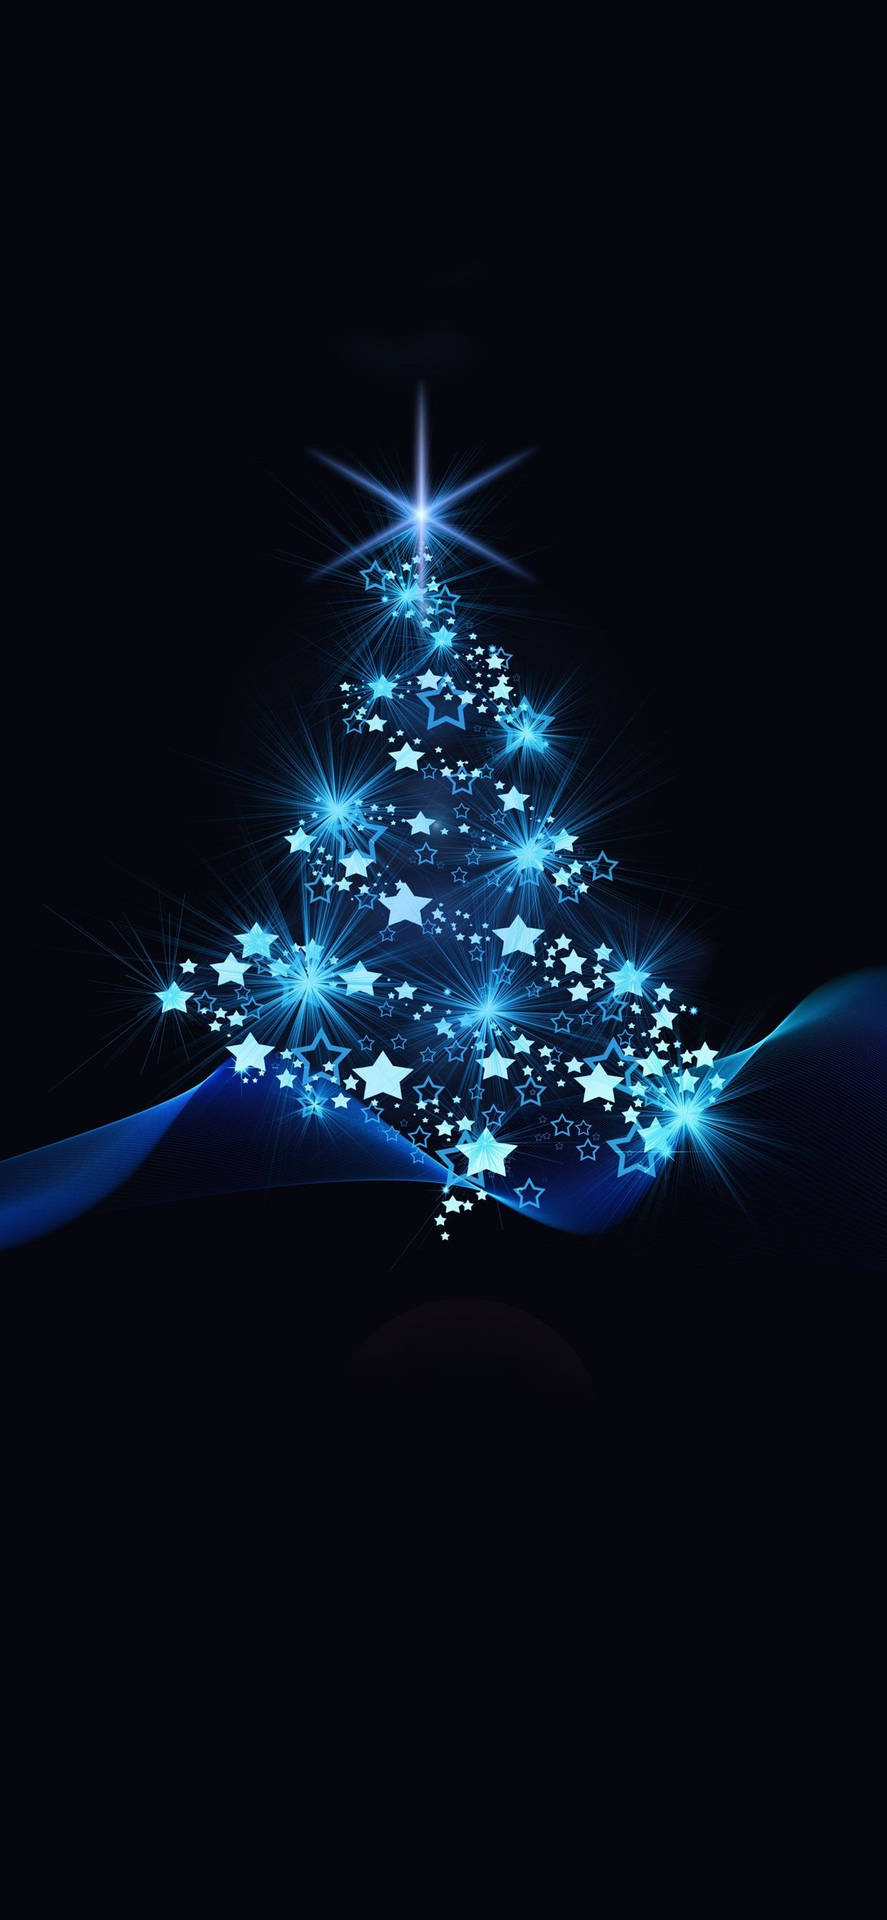 Iphone 11 Pro Max Christmas Flare Background